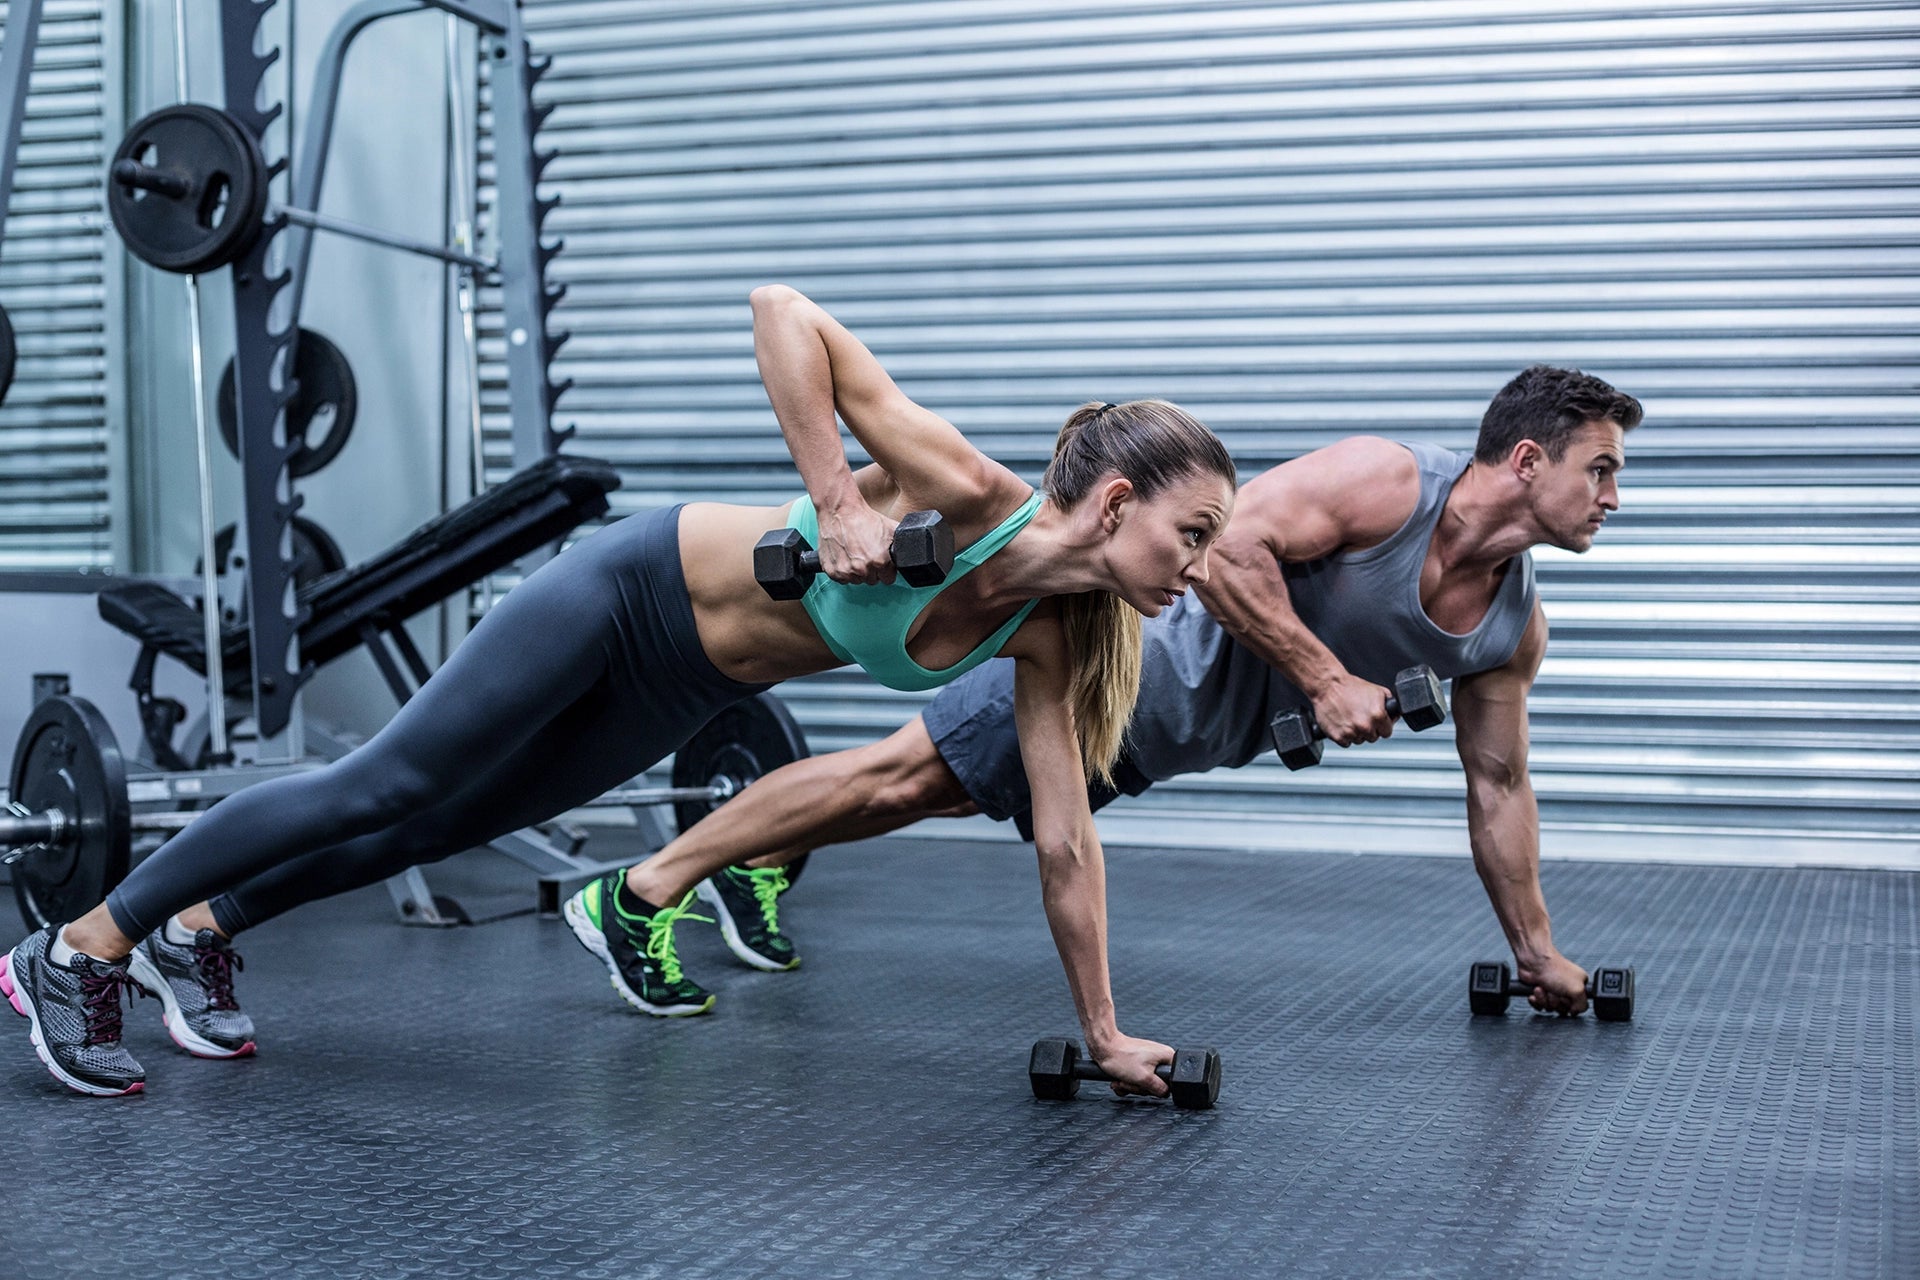 Man and woman working out, plank exercise